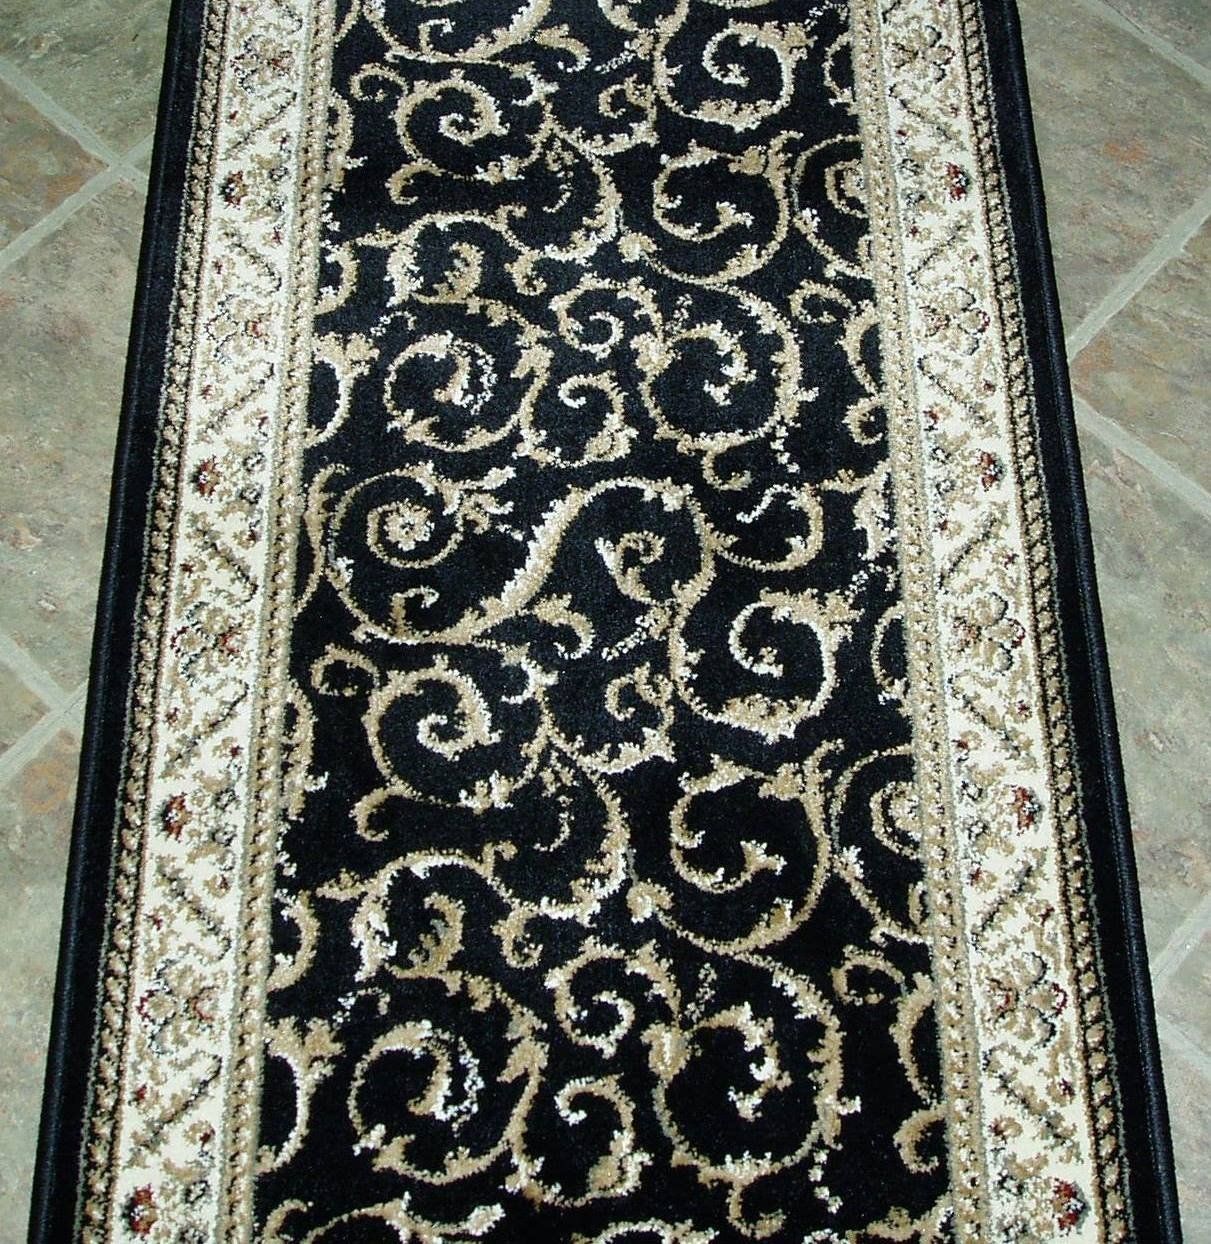 Interior Short Black And White Striped Hallway Runner Rugs With With Regard To Hallway Runners Black (View 6 of 20)